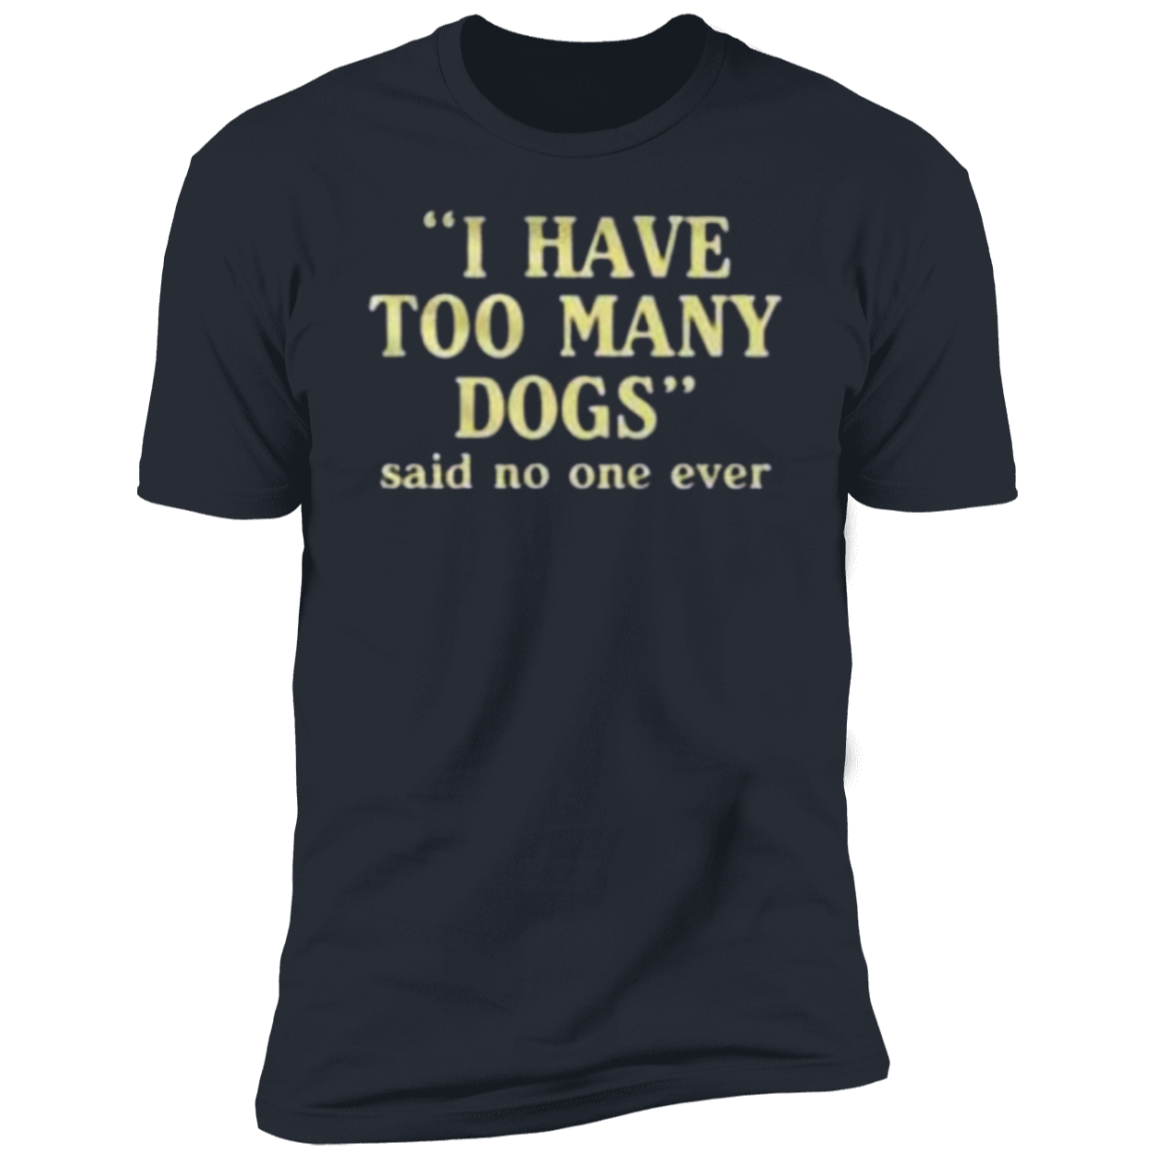 I have too many Dogs Tee